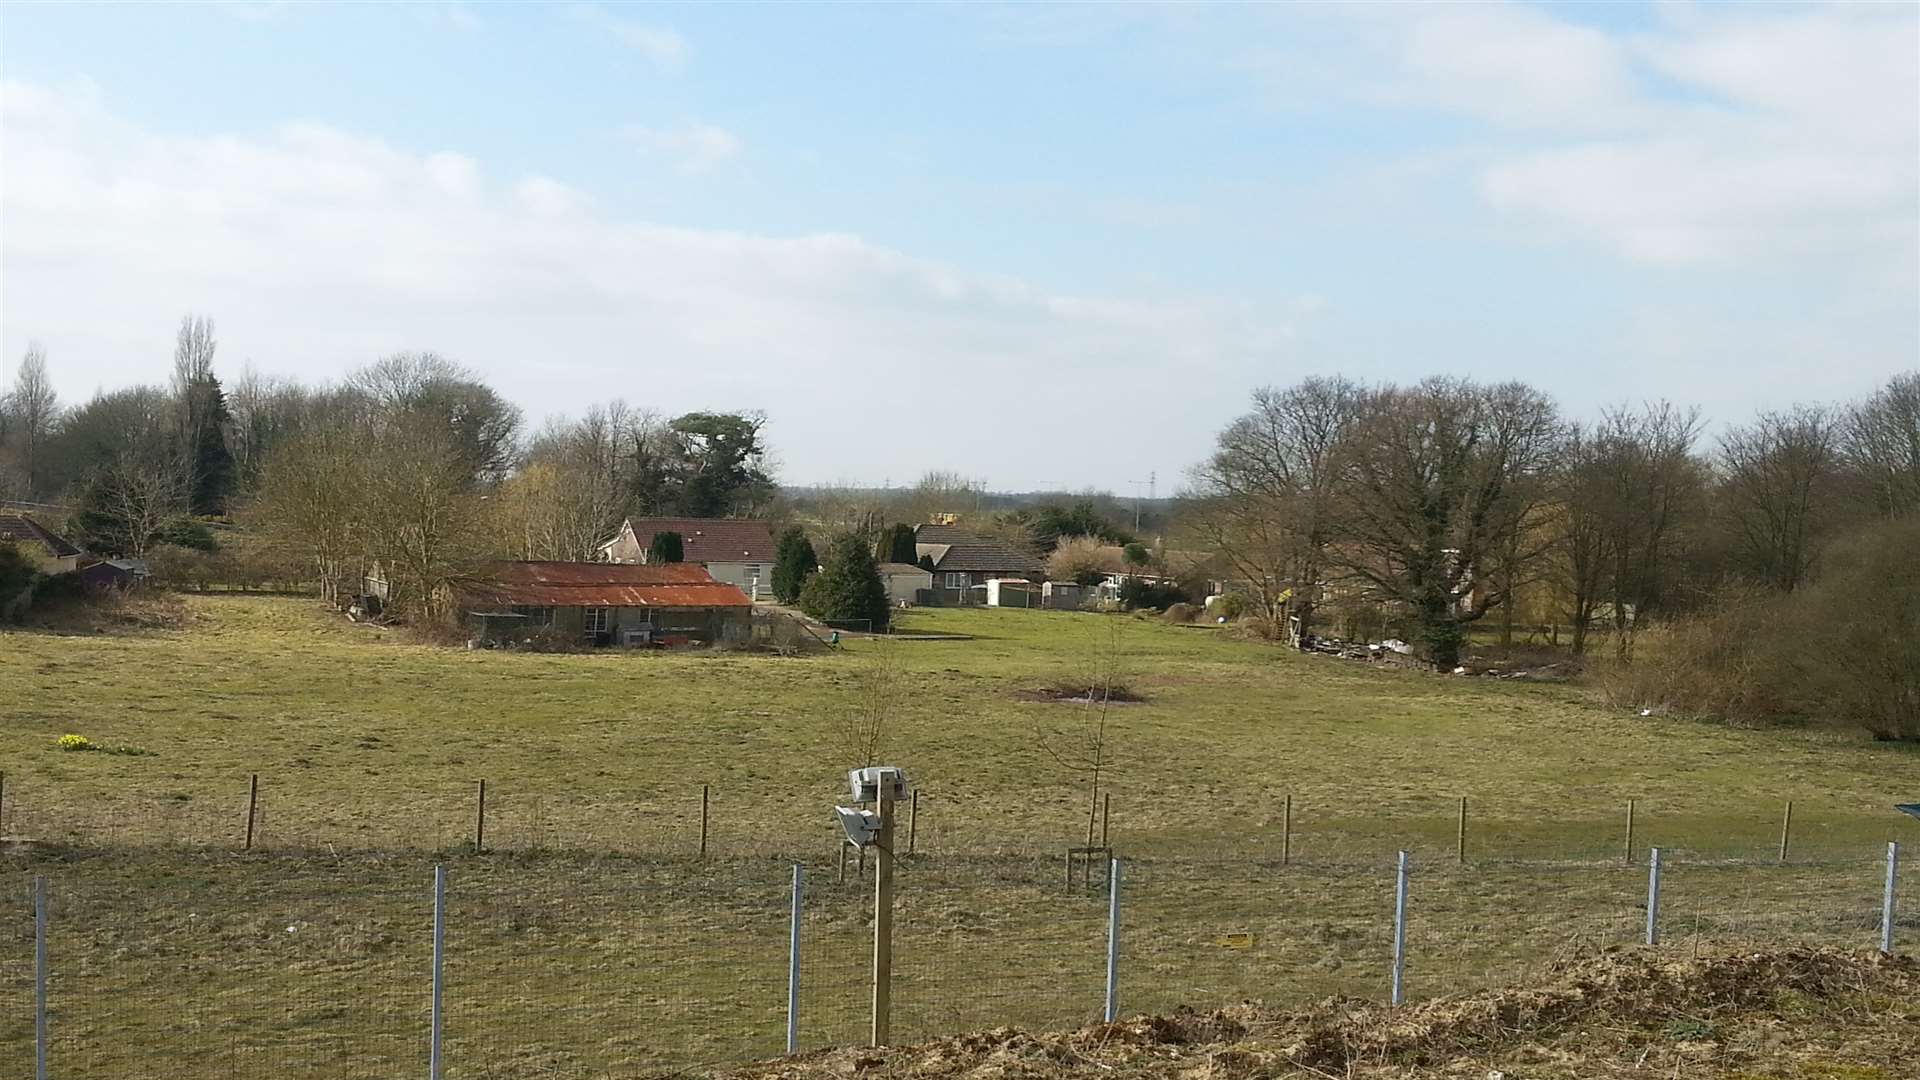 The site near Stop 24 on the M20 junction 11 where 60 new lorry spaces are going. They are within the boundary of the second fence. More spaces are planned for land behind the buildings shown.